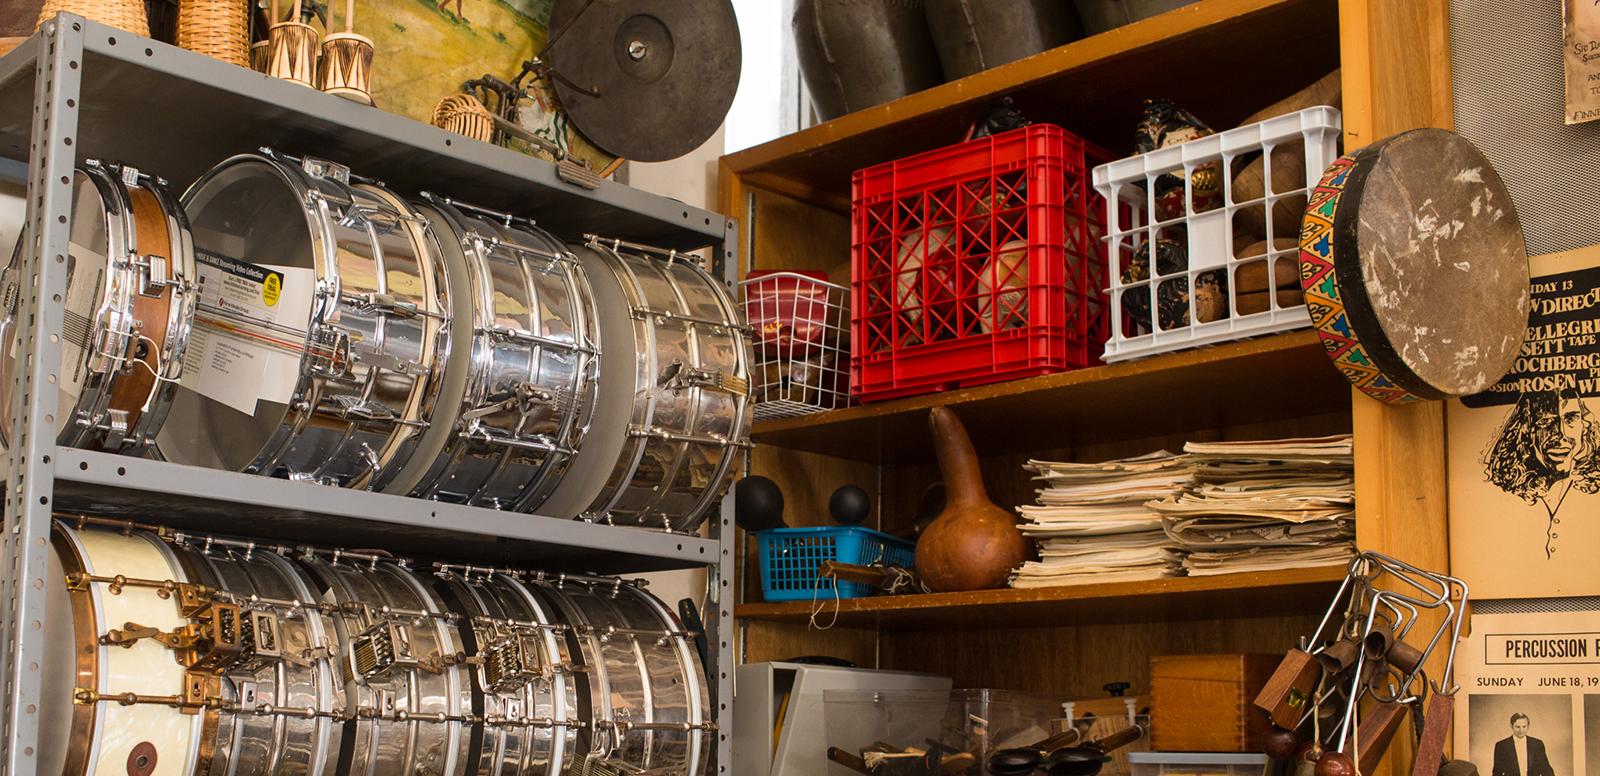 Part of the collection of percussion instruments in the percussion studio.